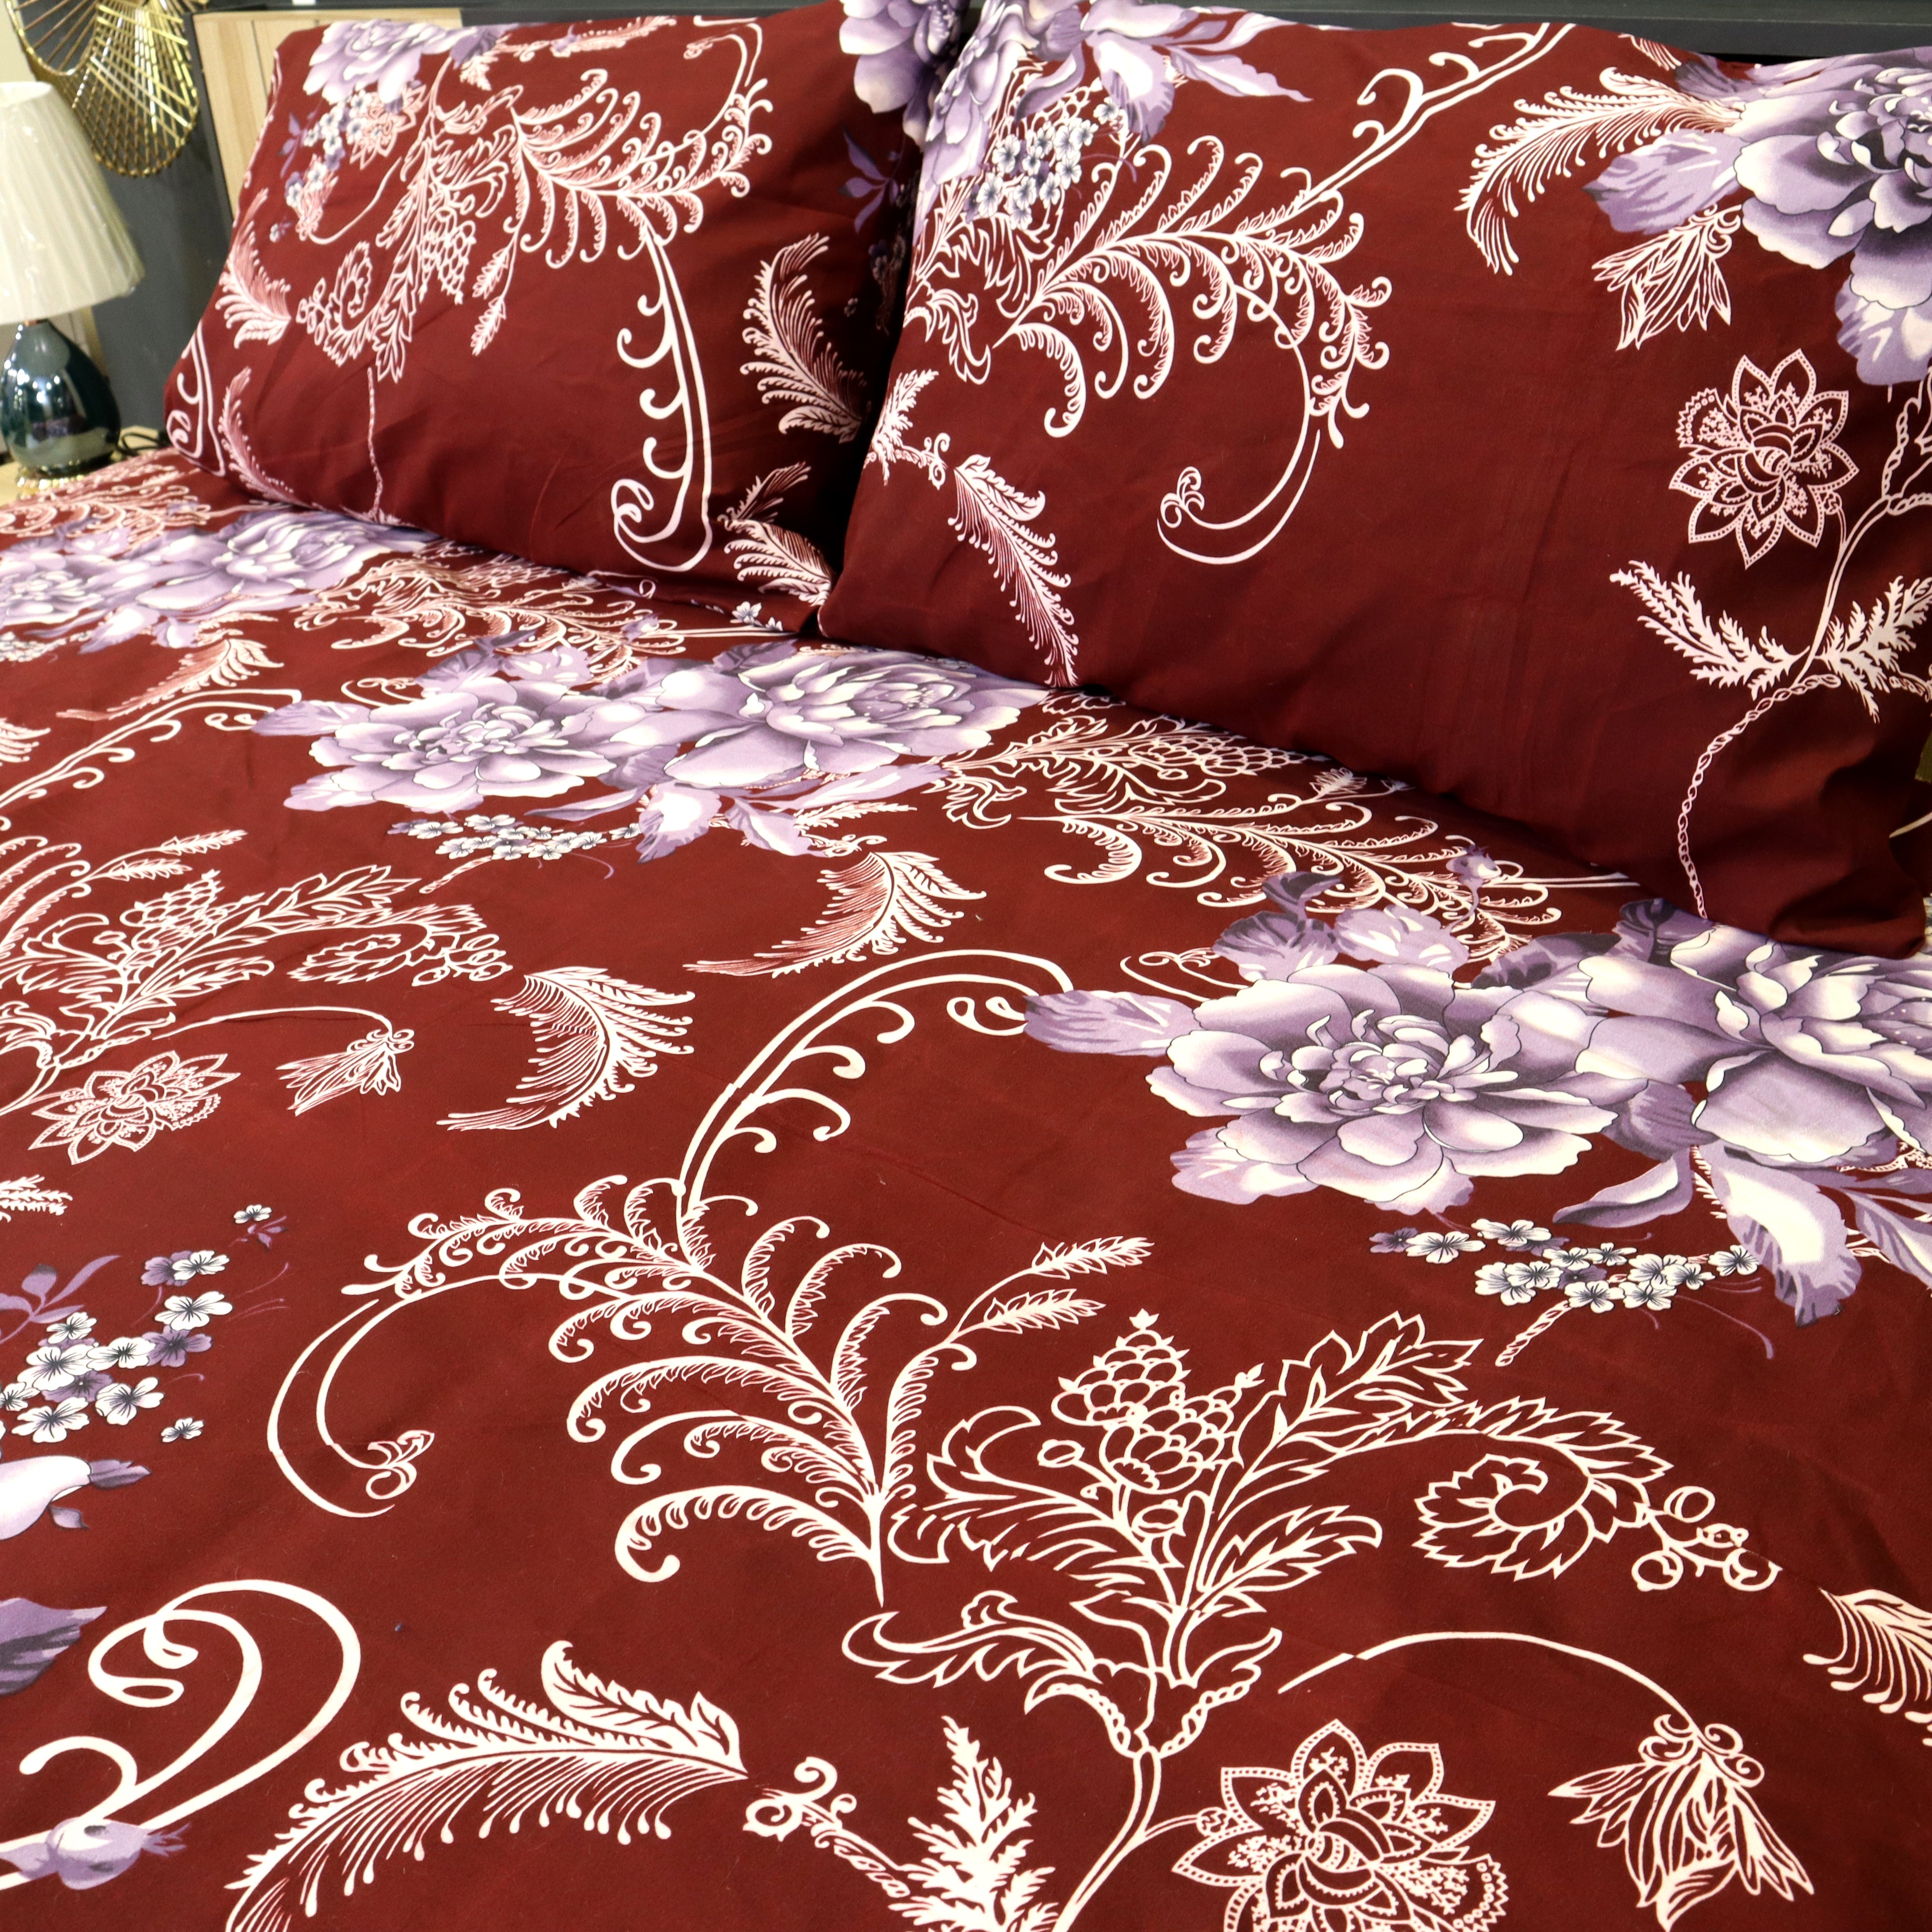 Bed Sheet Fantasy King Bed-Cherry Blossom